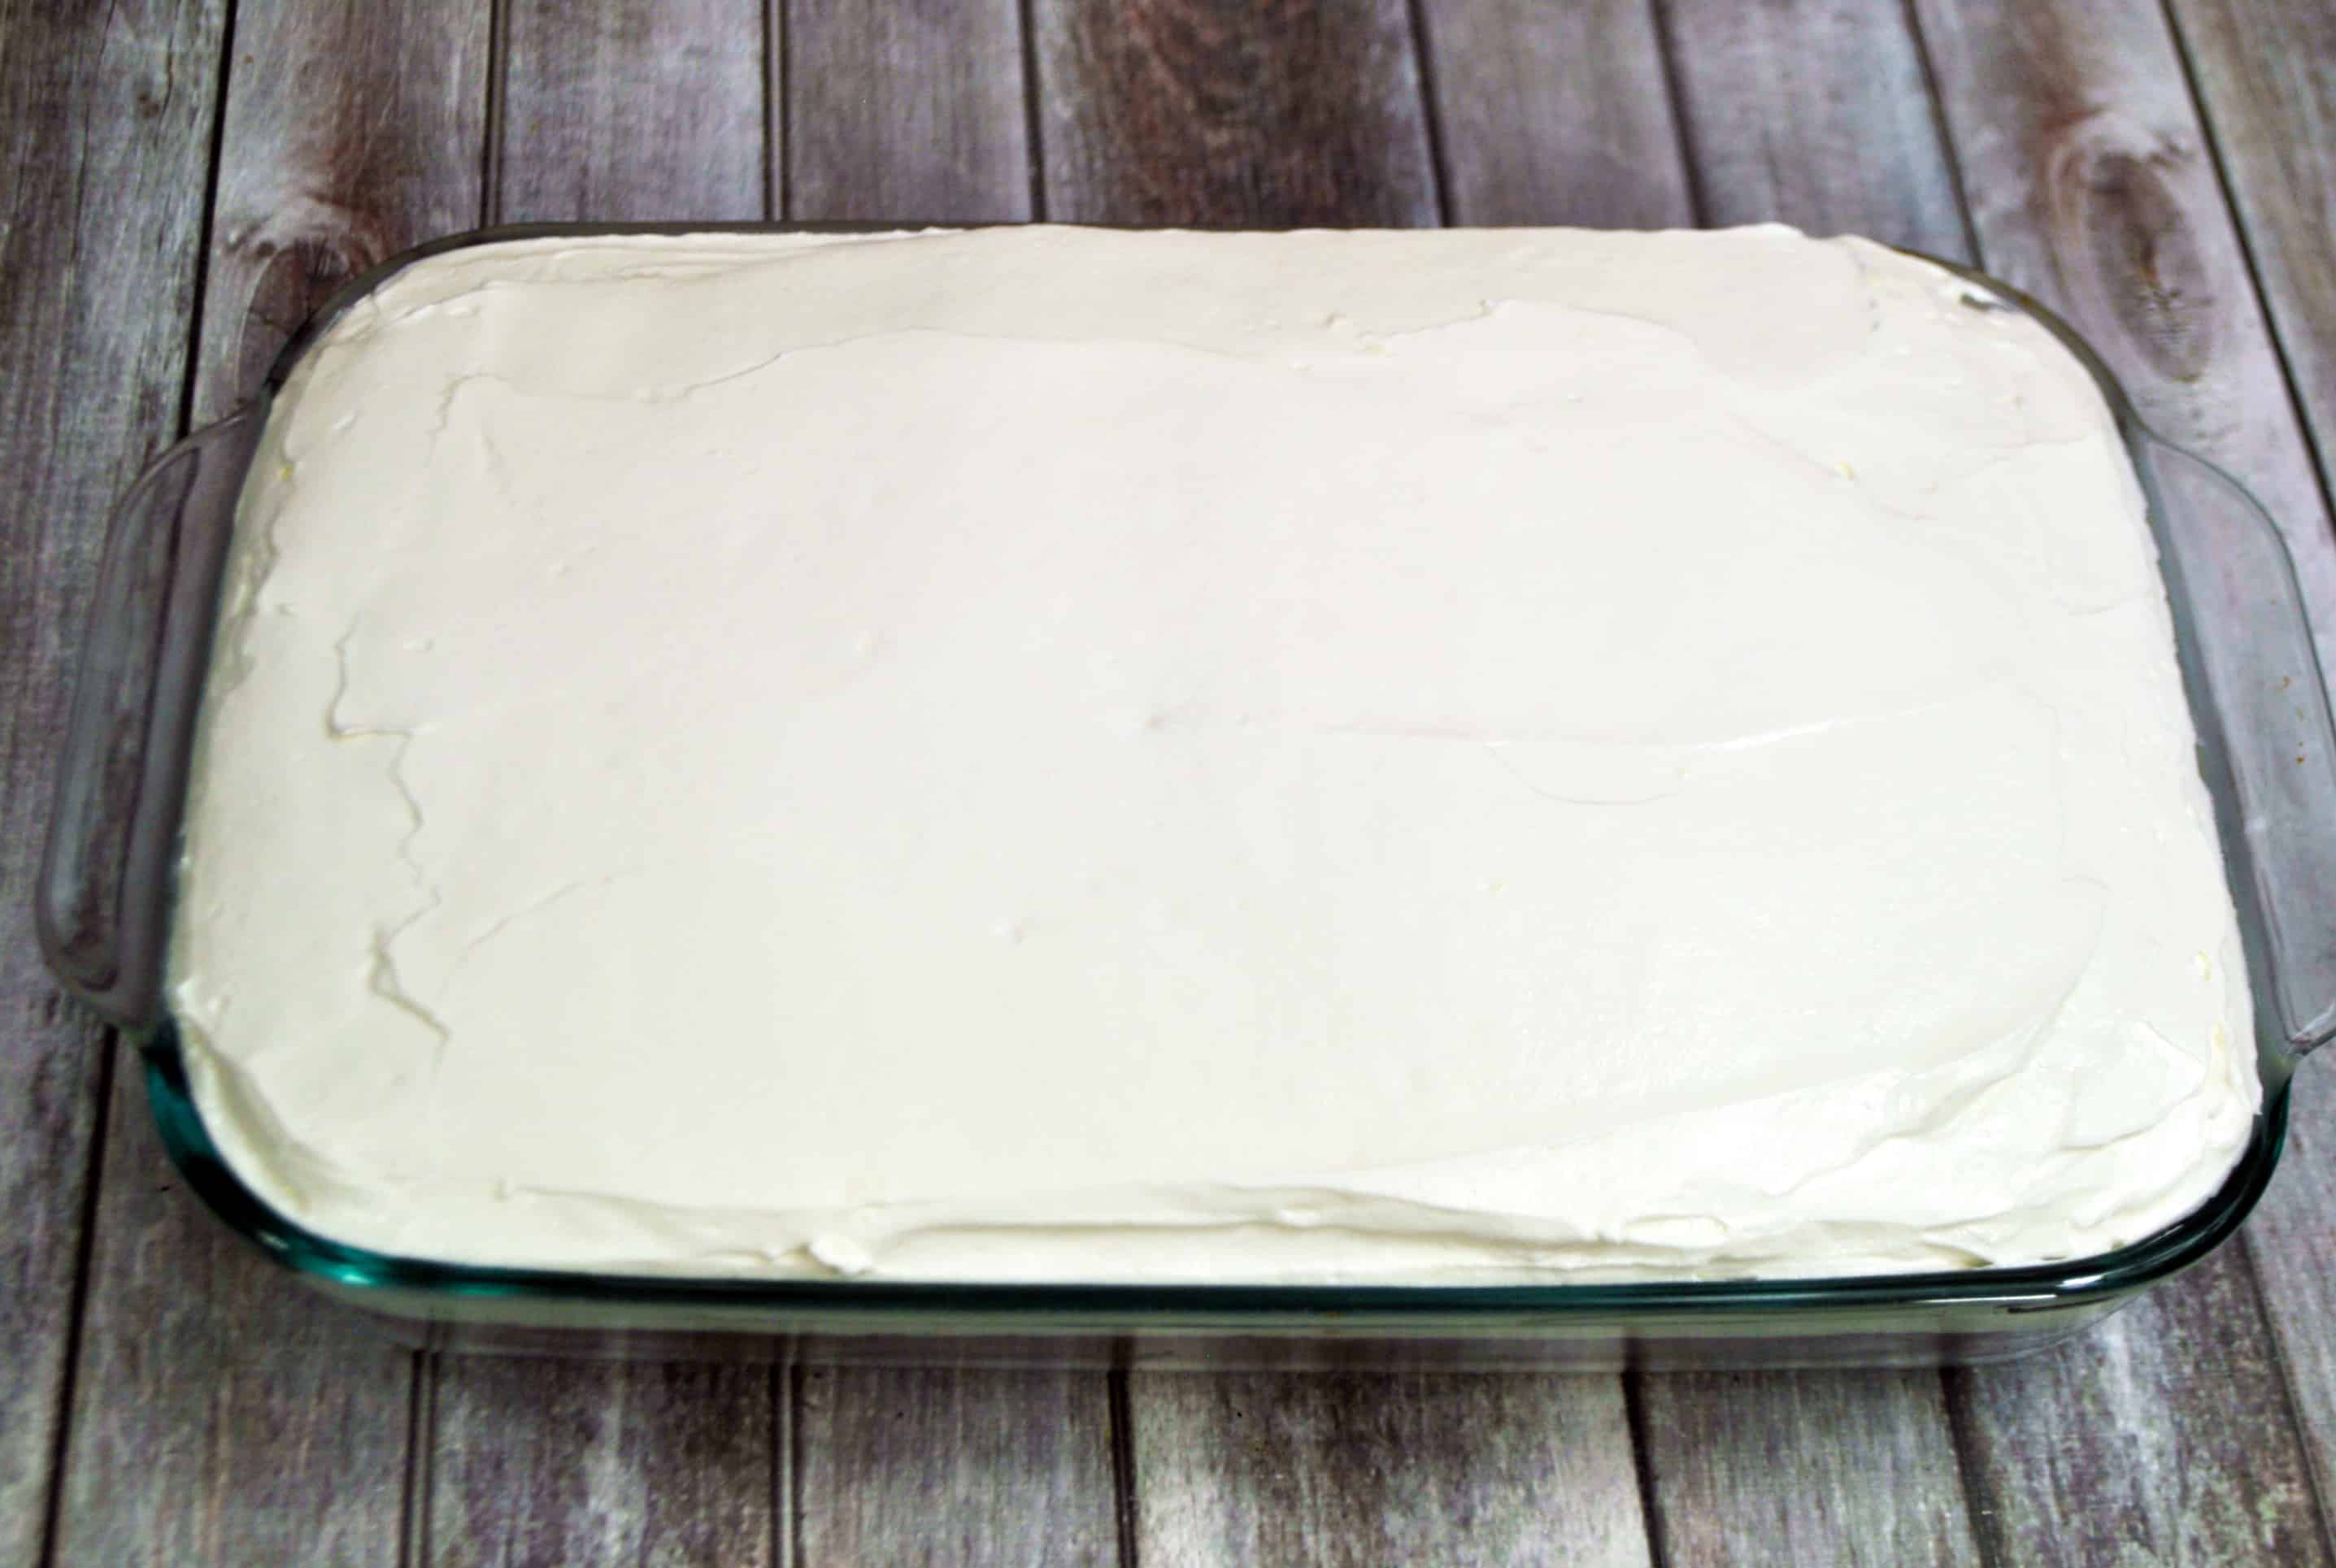 frost the cake with cream cheese whipped cream frosting